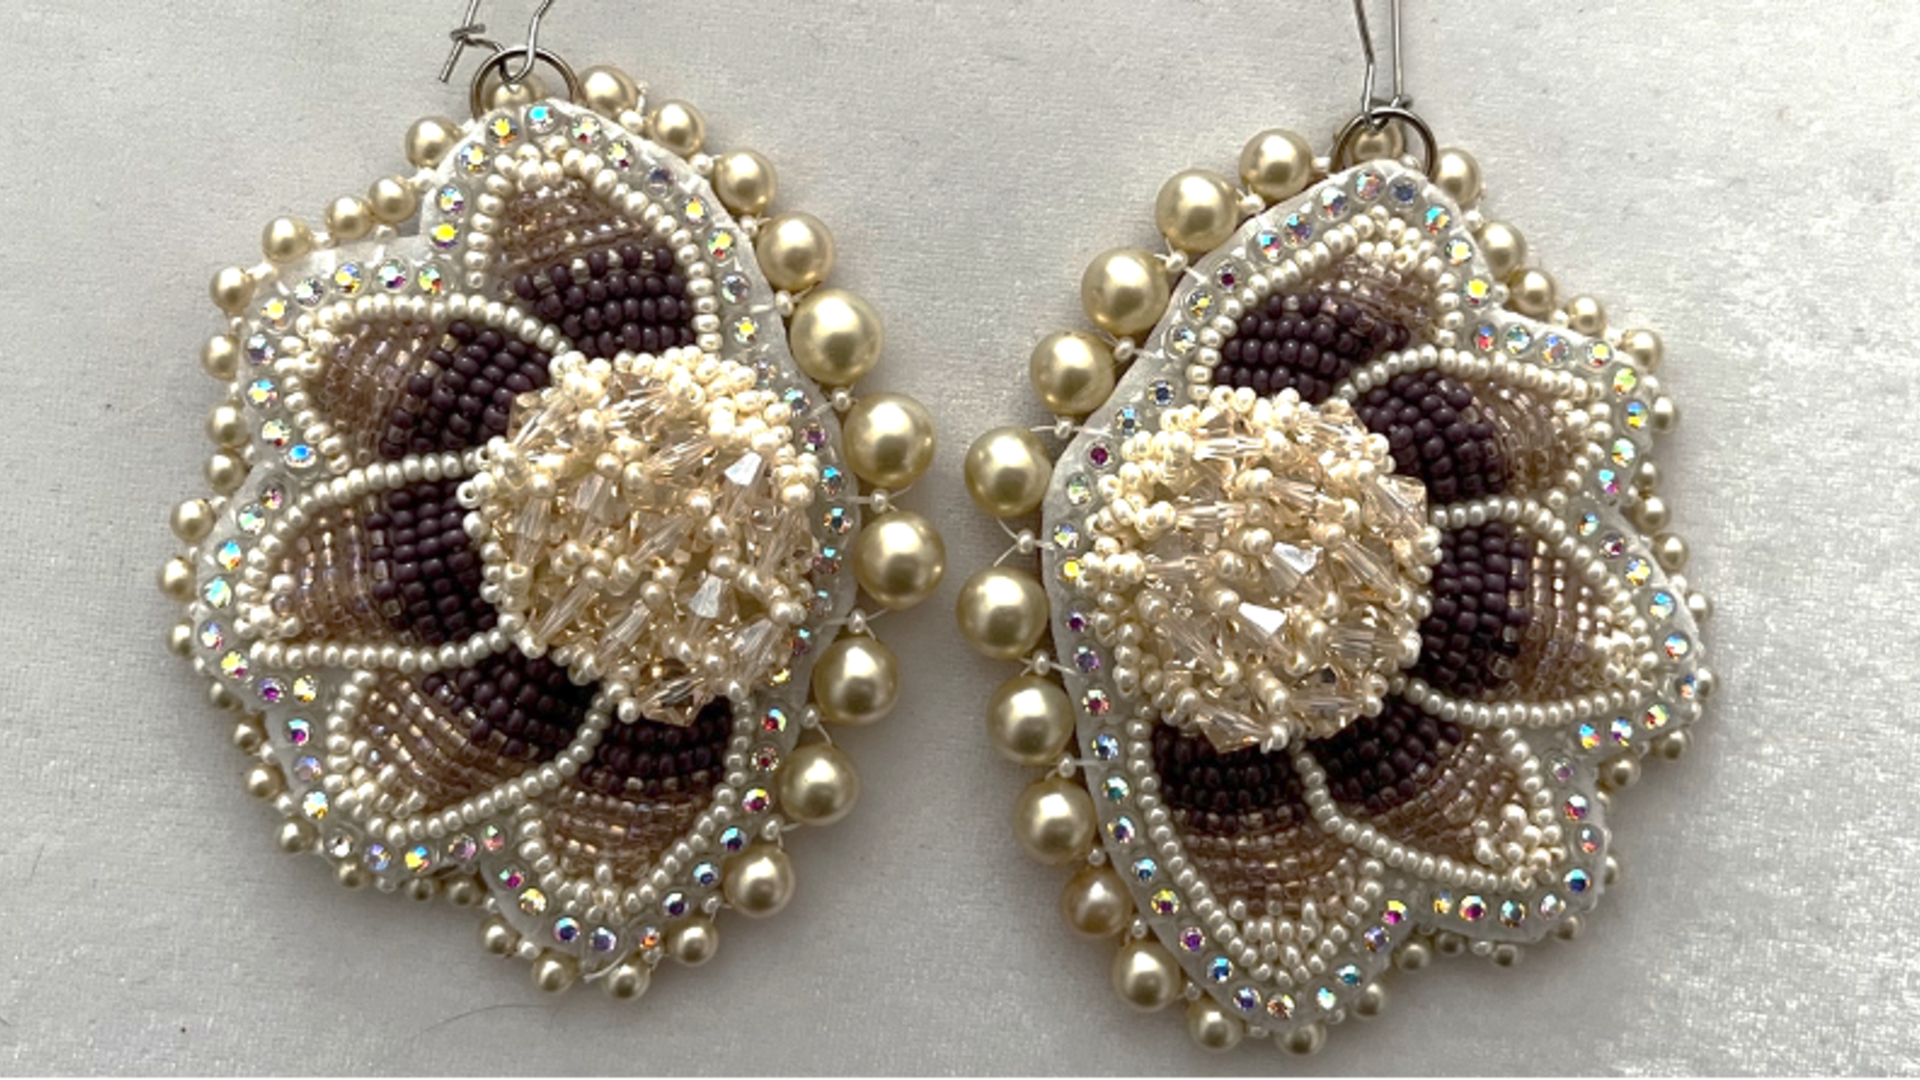 Earrings in the shape of a flower with pearls and beadwork